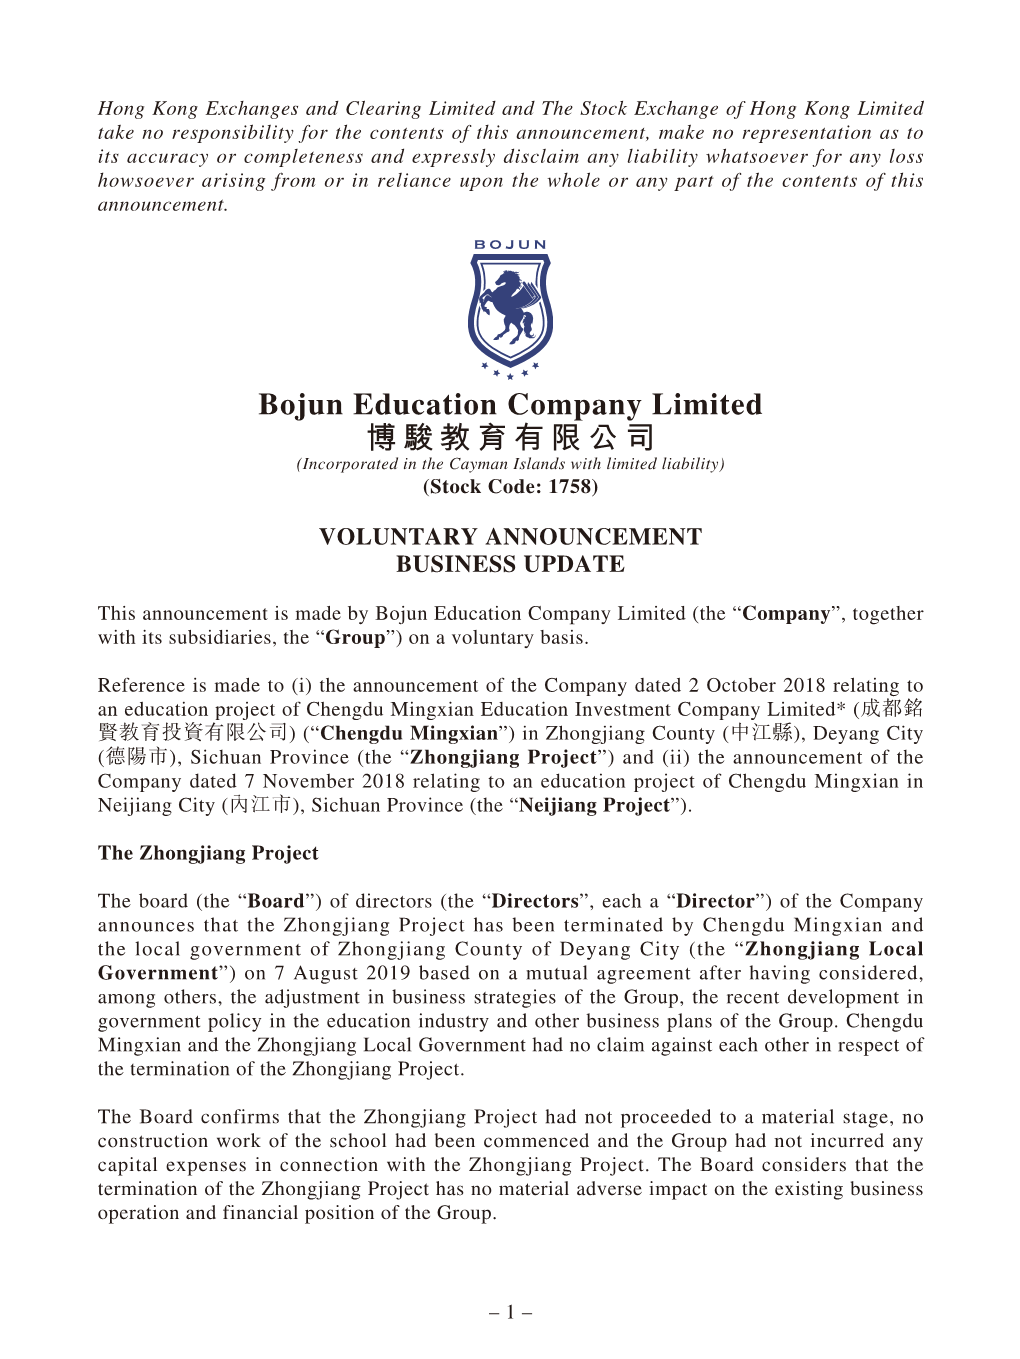 Bojun Education Company Limited 博駿教育有限公司 (Incorporated in the Cayman Islands with Limited Liability) (Stock Code: 1758)